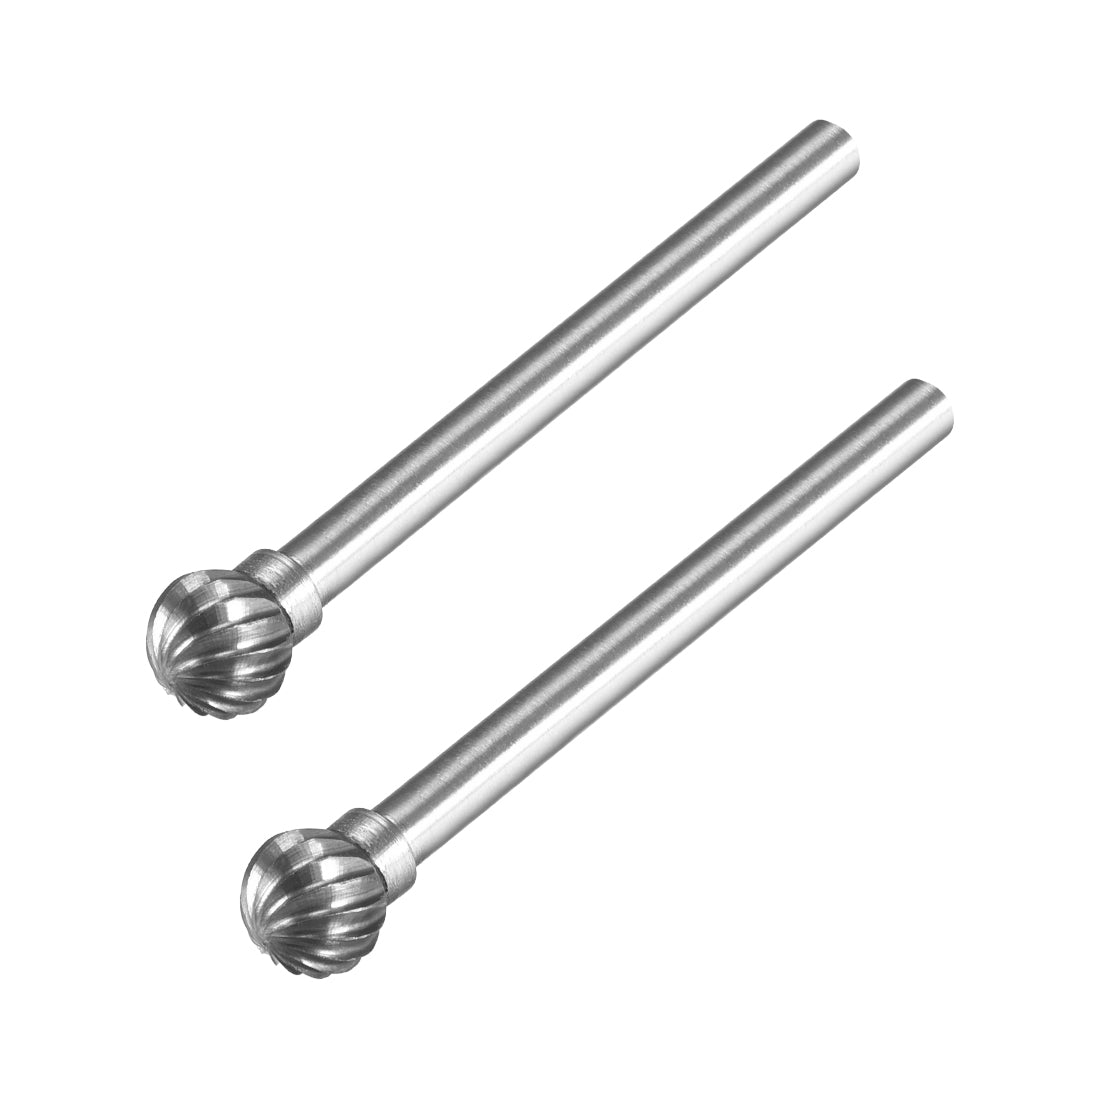 uxcell Uxcell Single Cut Rotary Burrs File Ball Shape with 1/8" Shank and 1/4" Head Size 2pcs